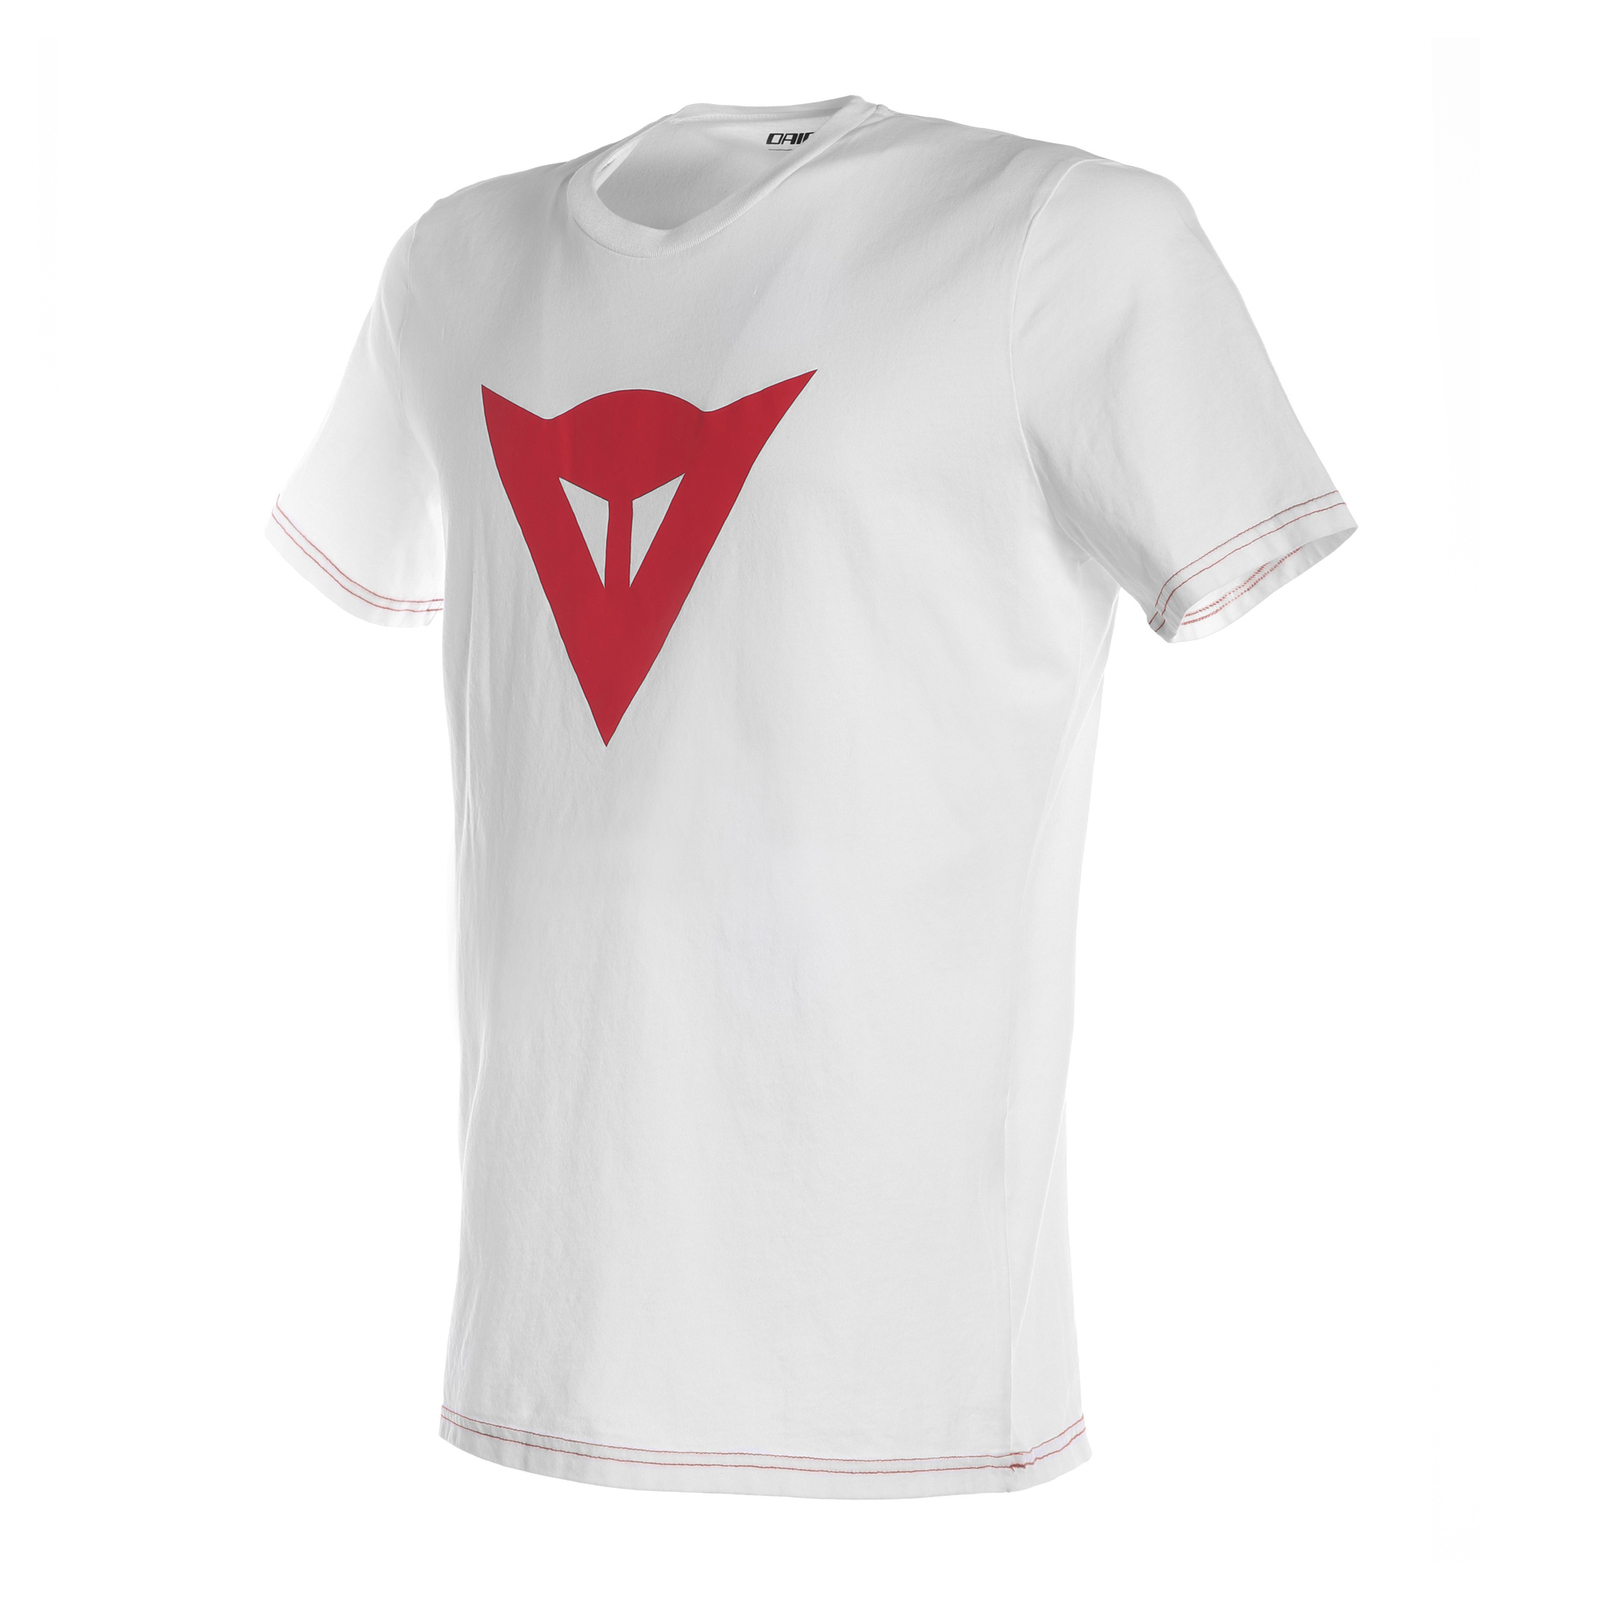 DAINESE CASUAL SPEED DEMON T-SHIRT WHITE/RED/M